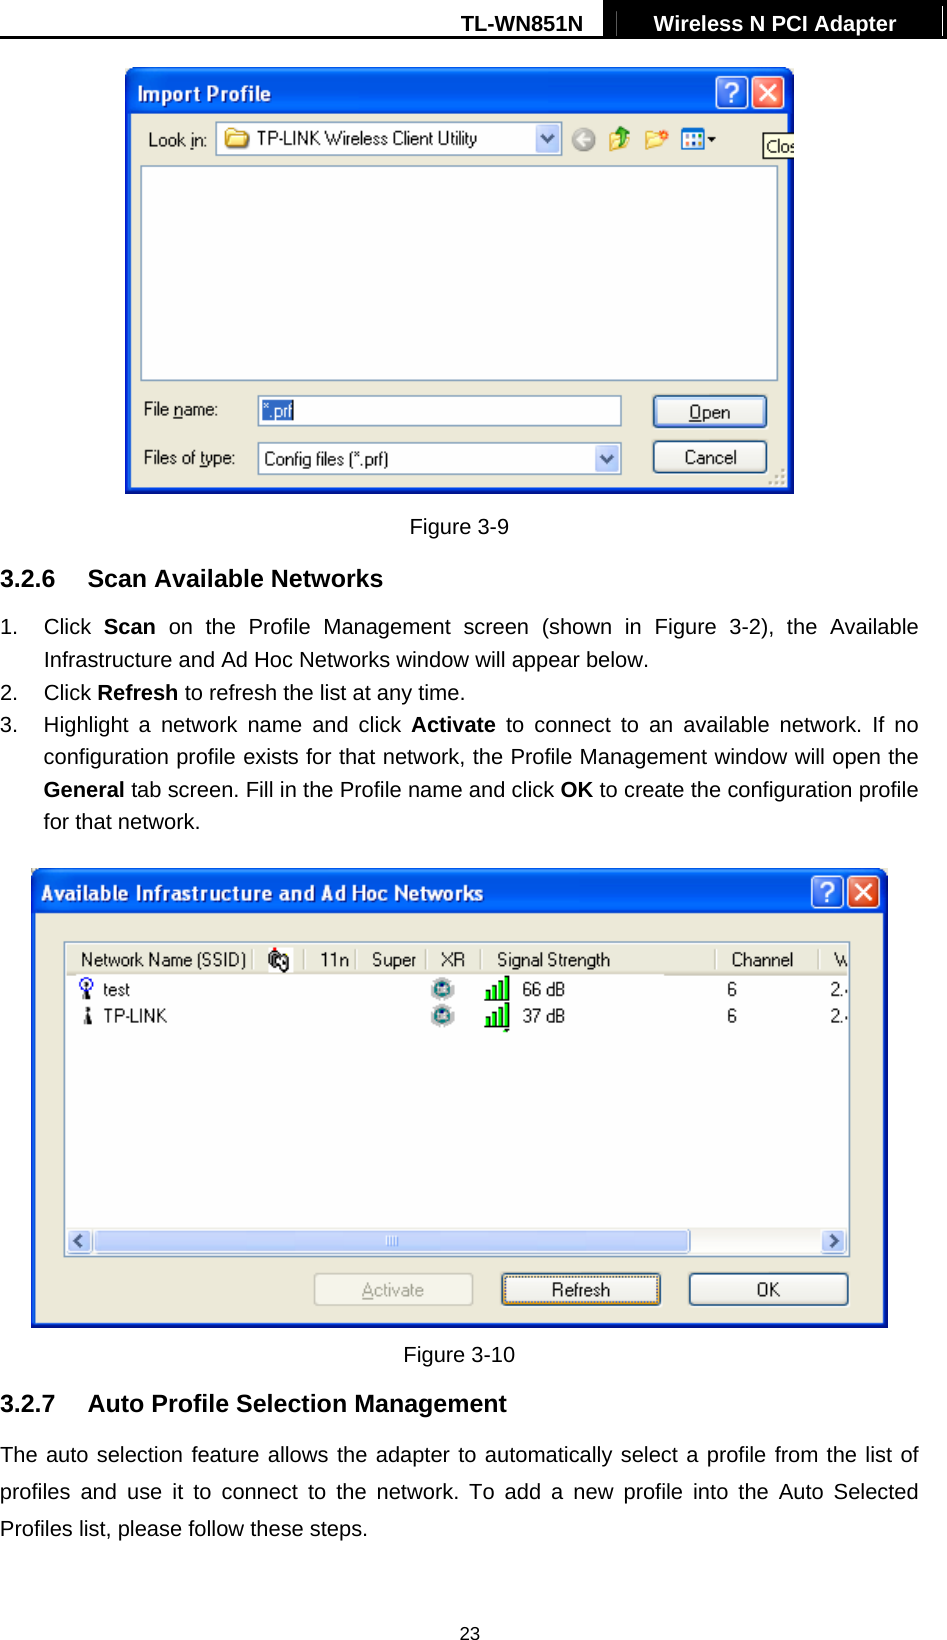 TL-WN851N  Wireless N PCI Adapter   23 Figure 3-9 3.2.6  Scan Available Networks 1. Click Scan on the Profile Management screen (shown in Figure 3-2), the Available Infrastructure and Ad Hoc Networks window will appear below. 2. Click Refresh to refresh the list at any time. 3.  Highlight a network name and click Activate to connect to an available network. If no configuration profile exists for that network, the Profile Management window will open the General tab screen. Fill in the Profile name and click OK to create the configuration profile for that network.  Figure 3-10 3.2.7  Auto Profile Selection Management The auto selection feature allows the adapter to automatically select a profile from the list of profiles and use it to connect to the network. To add a new profile into the Auto Selected Profiles list, please follow these steps. 